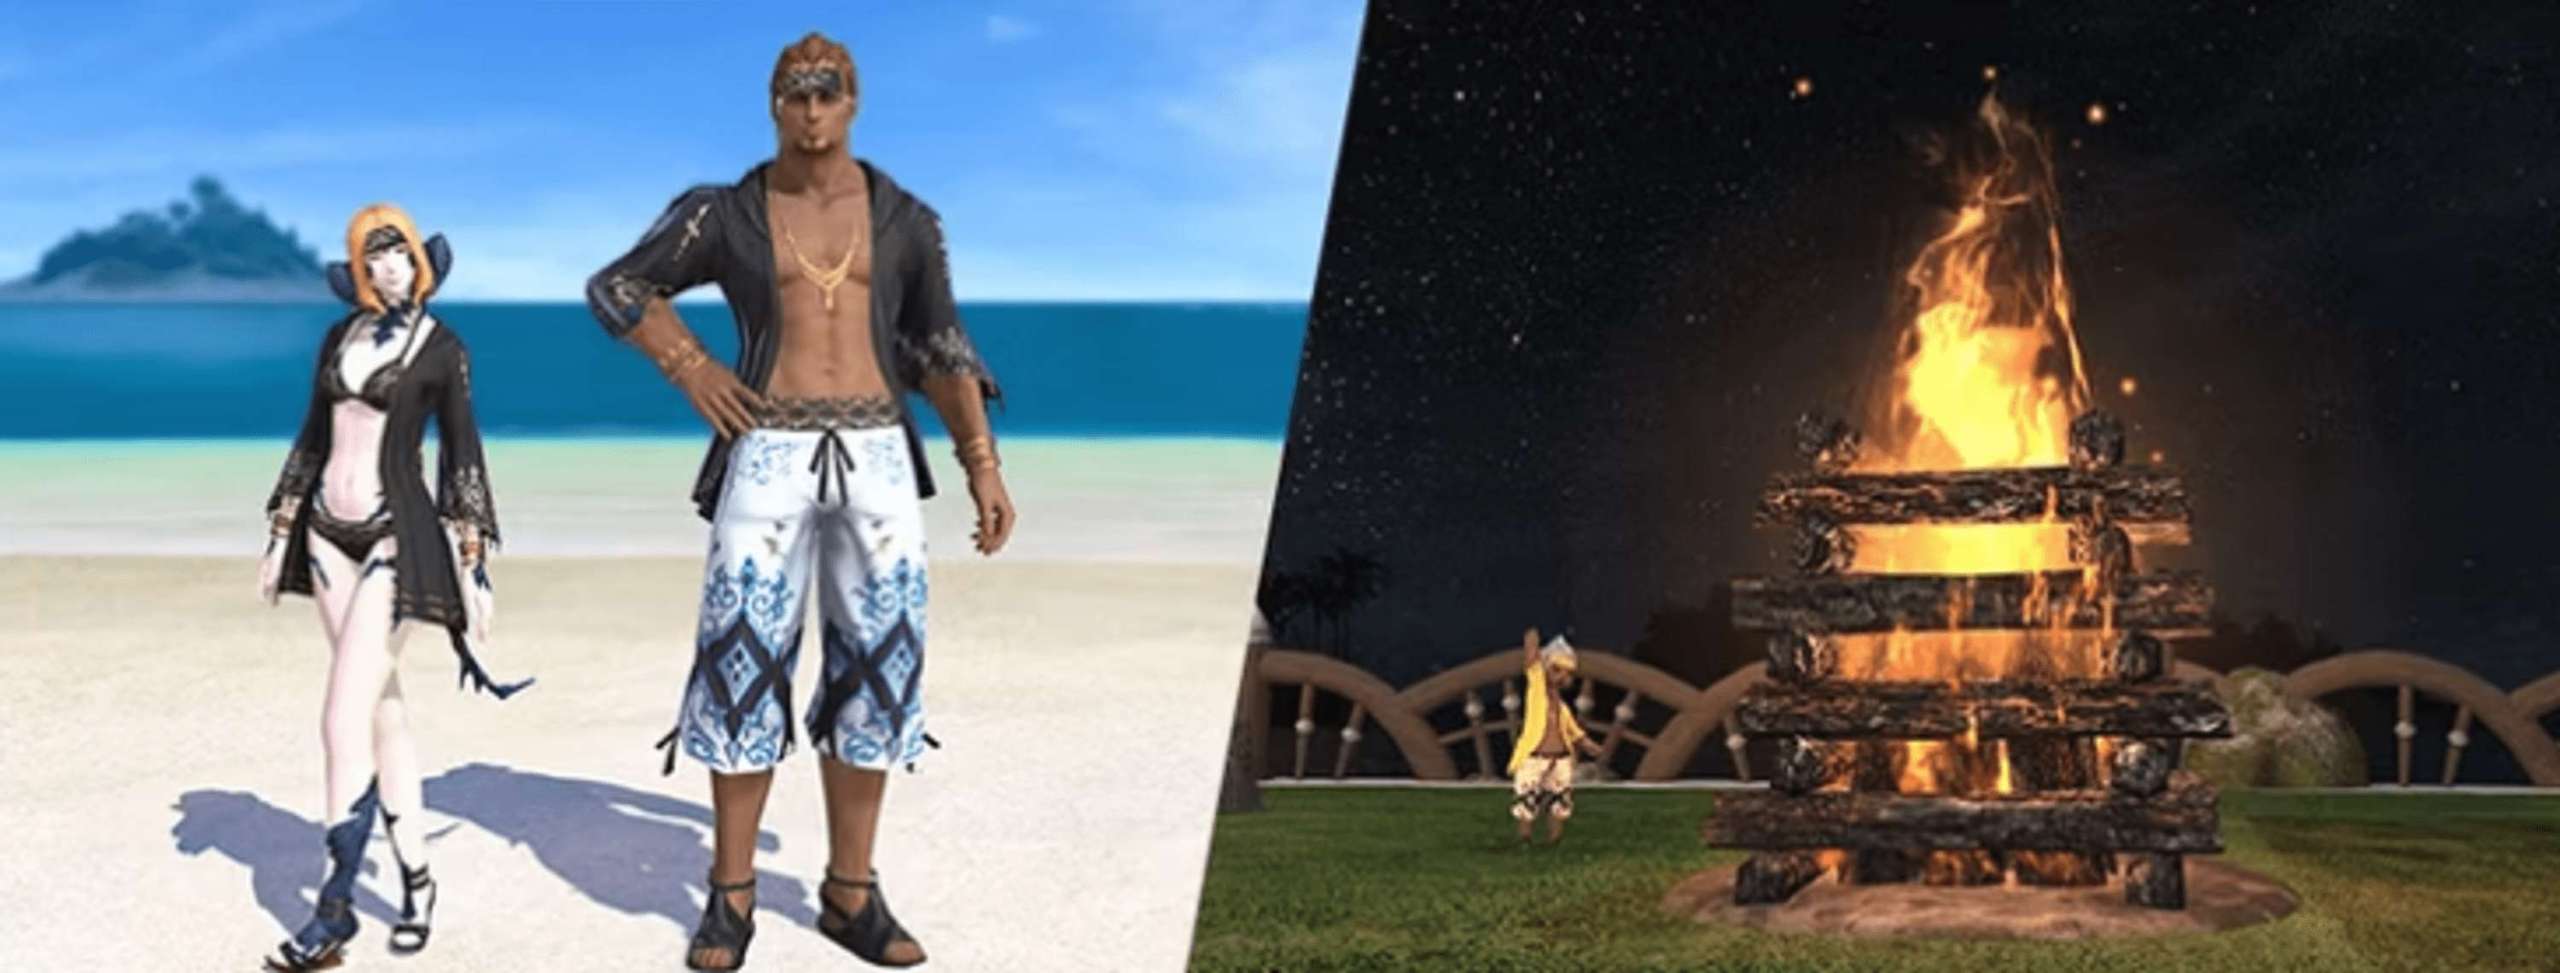 Final Fantasy 14 Is Getting Ready To Start The Moonfire Faire Adventure This Year With Some Sizzling New Items Ideal For Enjoyment In The Hot Weather